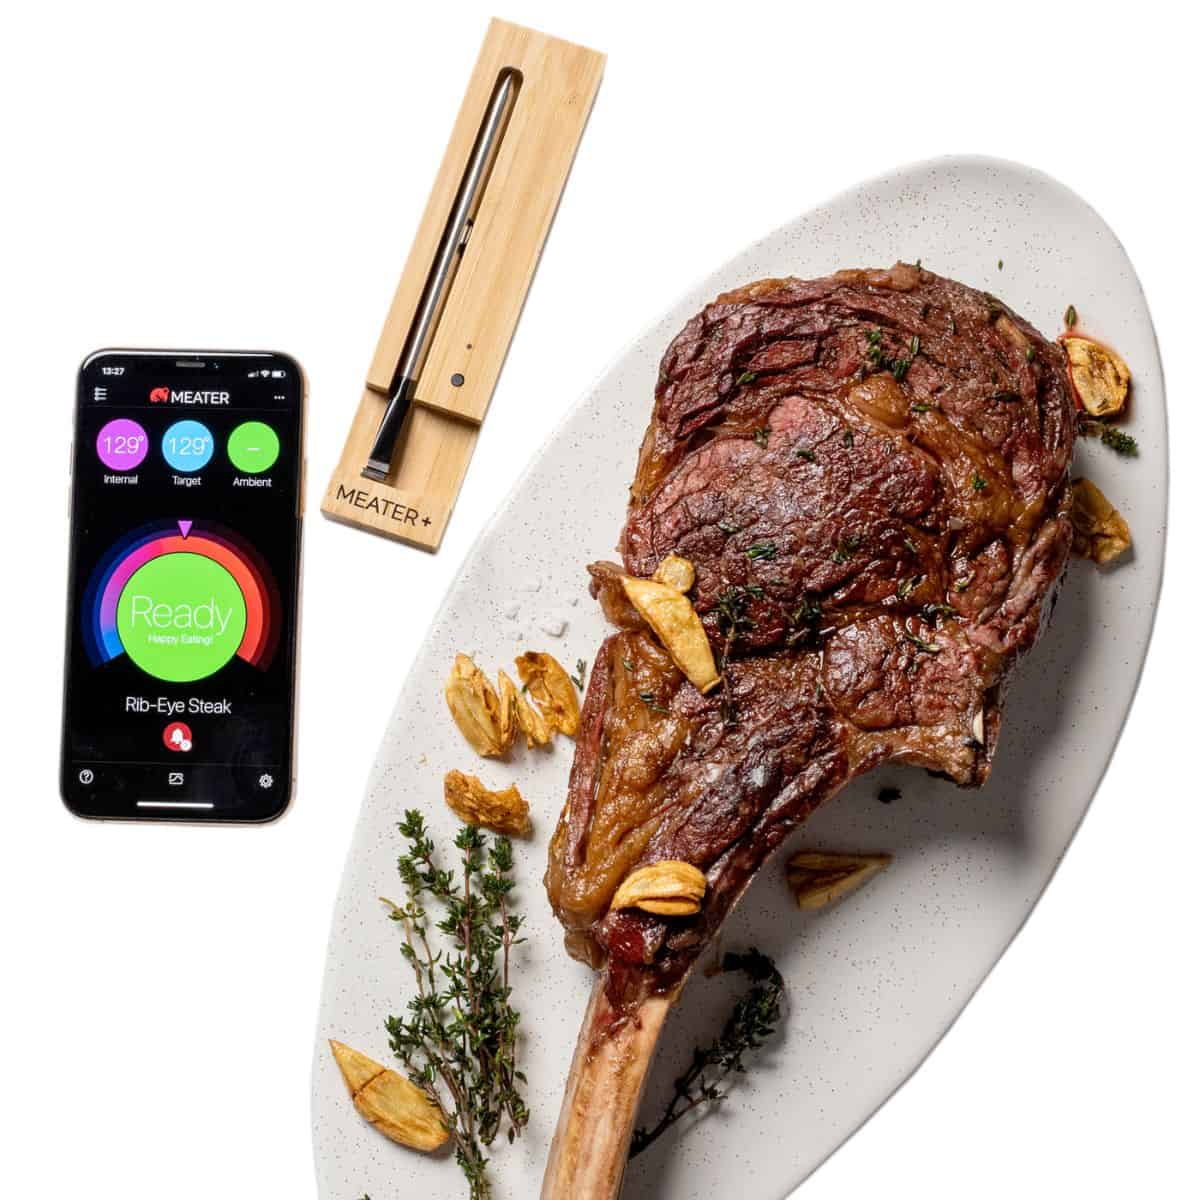 A meater+ thermometer near a phone showing the app and a piece of steak on a white background.